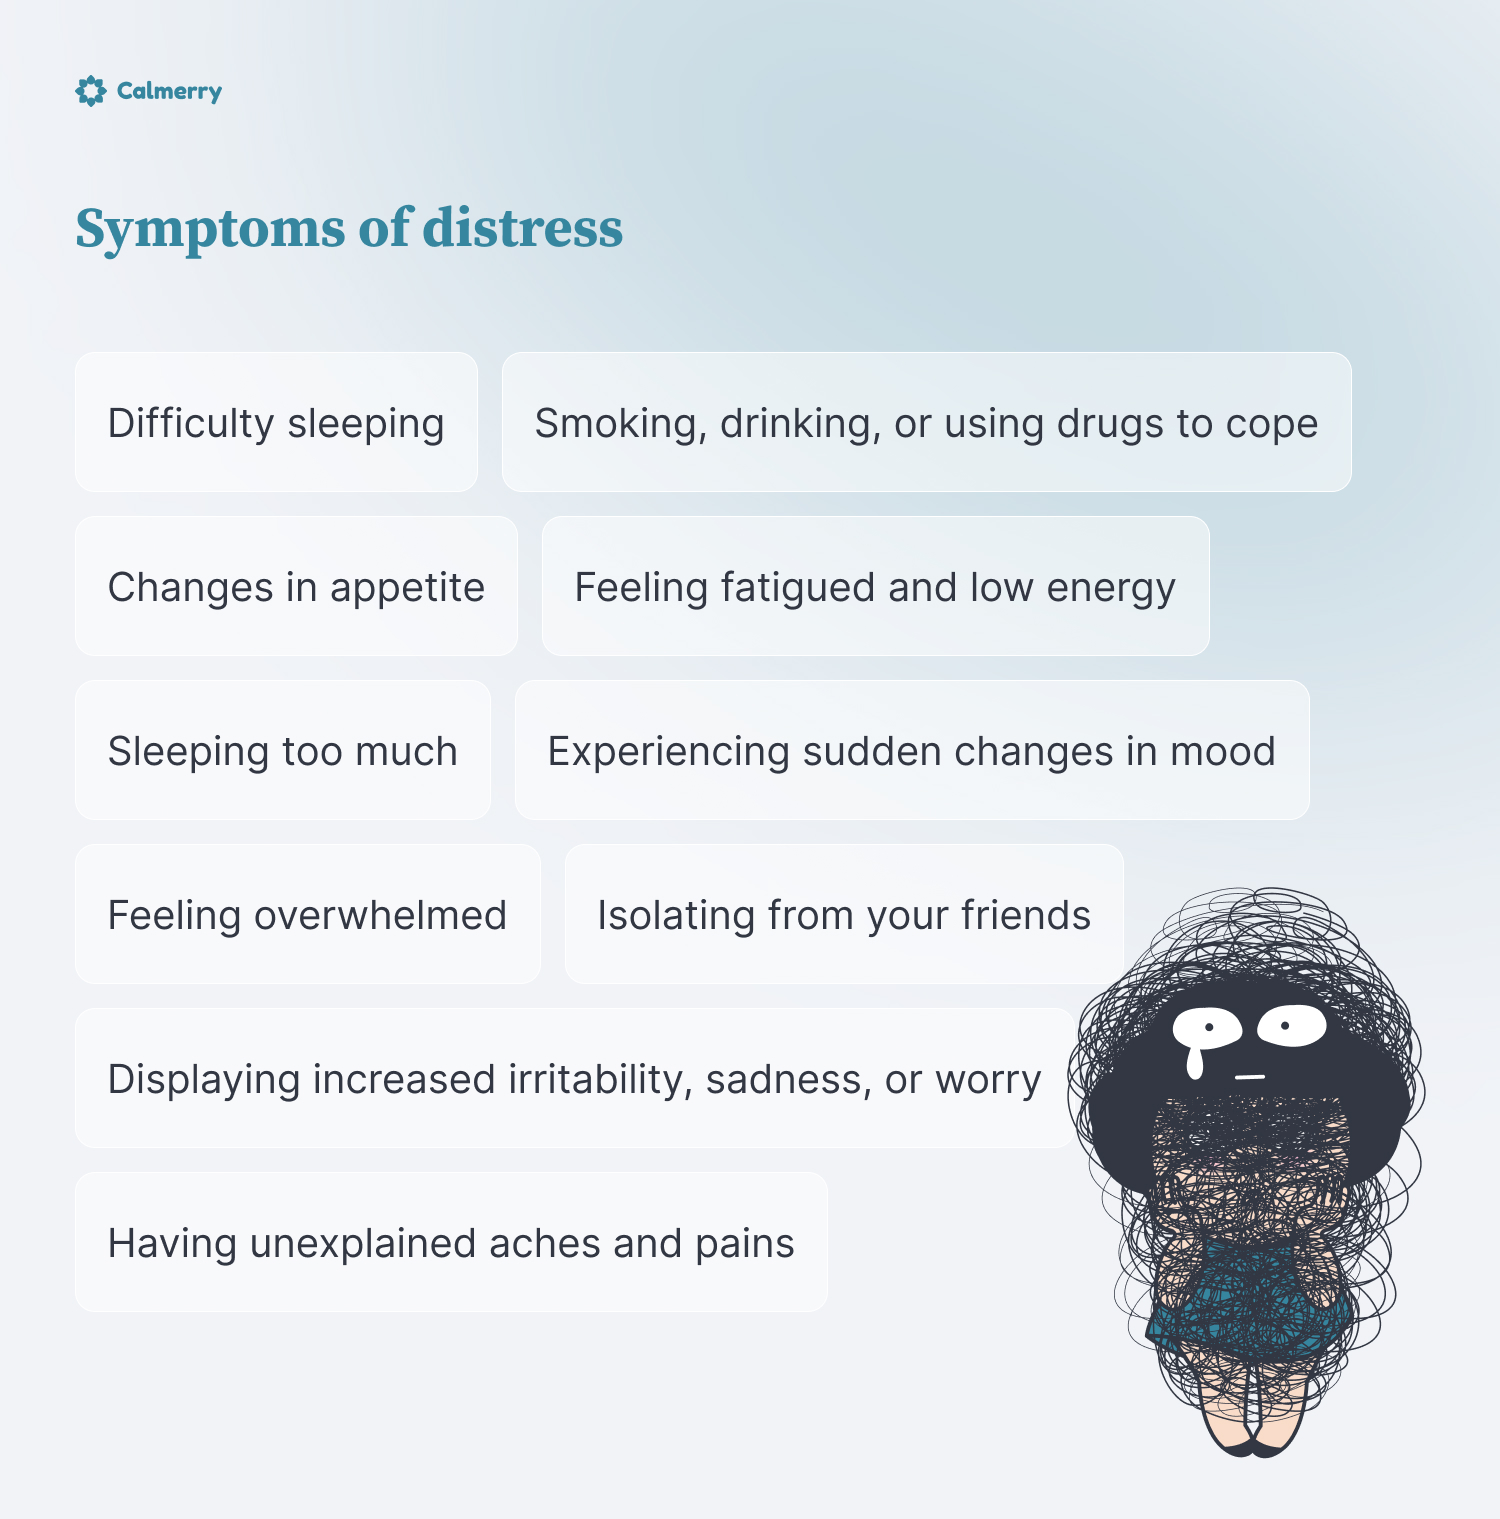 Symptoms of distress
Difficulty sleeping
Sleeping too much
Changes in appetite
Being unable to relax
Feeling overwhelmed
Isolating from your friends
Feeling fatigued and low energy
Having unexplained aches and pains
Experiencing sudden changes in mood
Smoking, drinking, or using drugs to cope
Displaying increased irritability, sadness, or worry